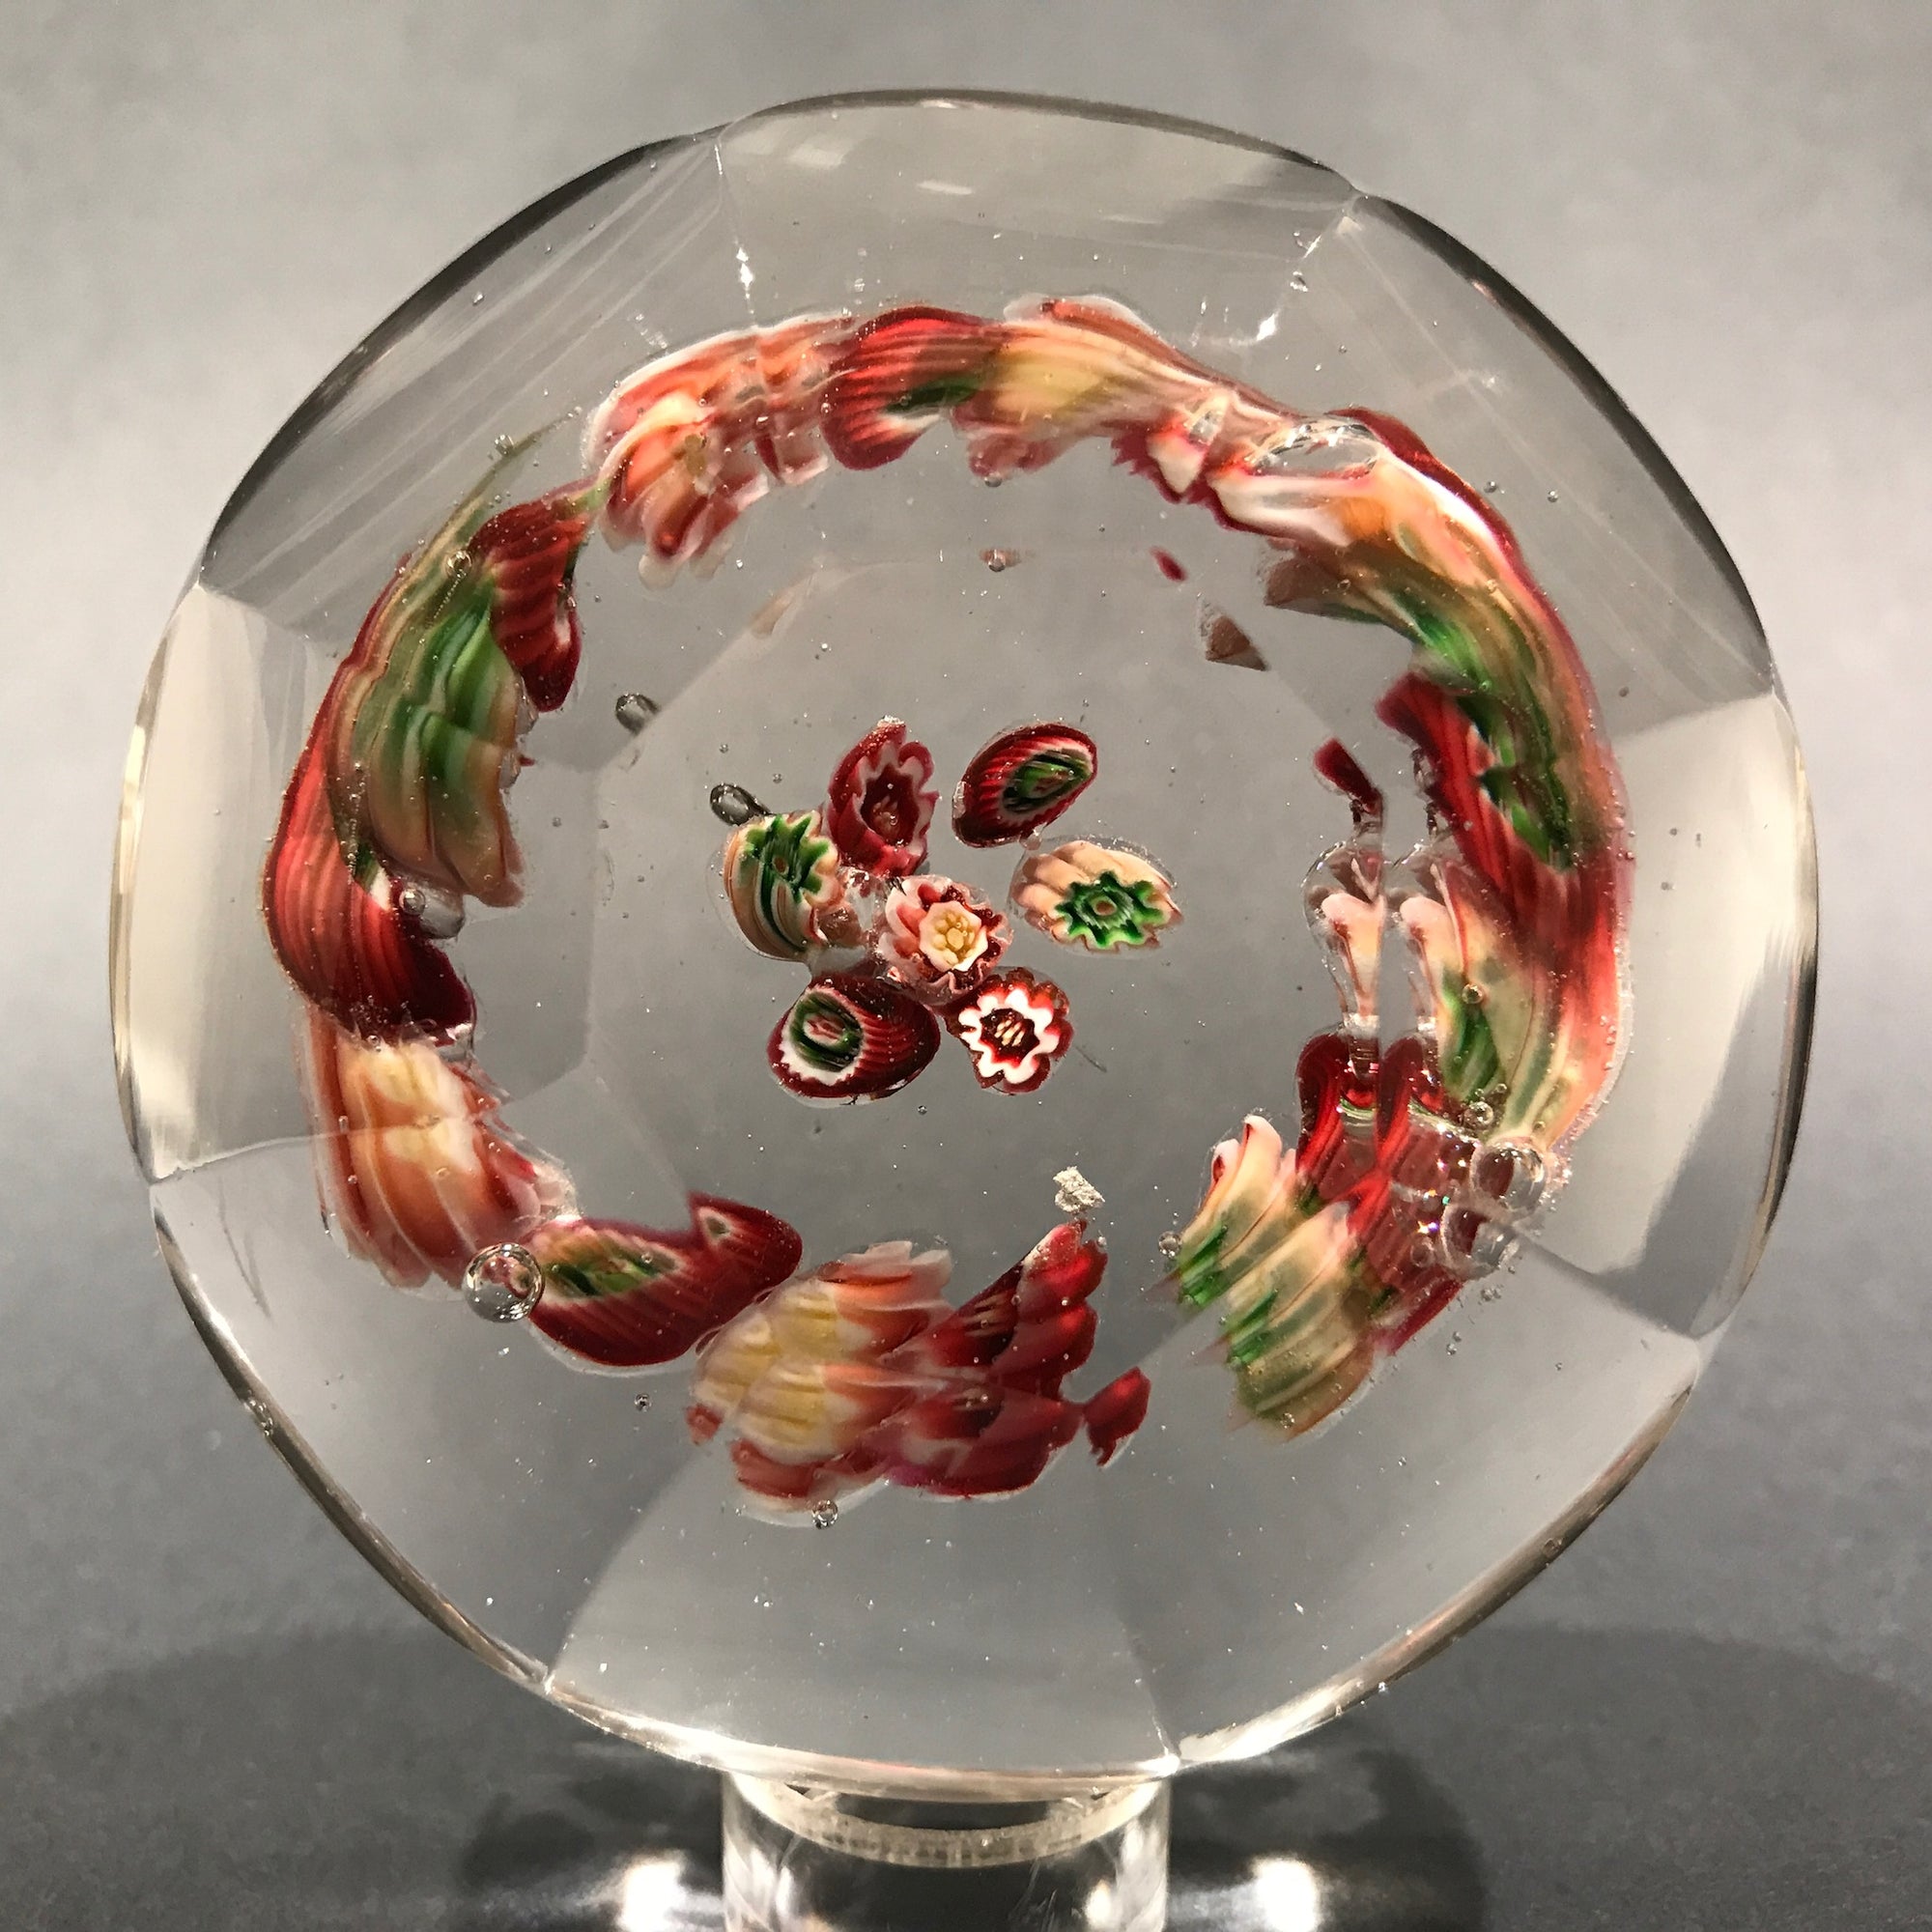 Antique Unknown French or Belgian Art Glass Paperweight Complex Millefiori